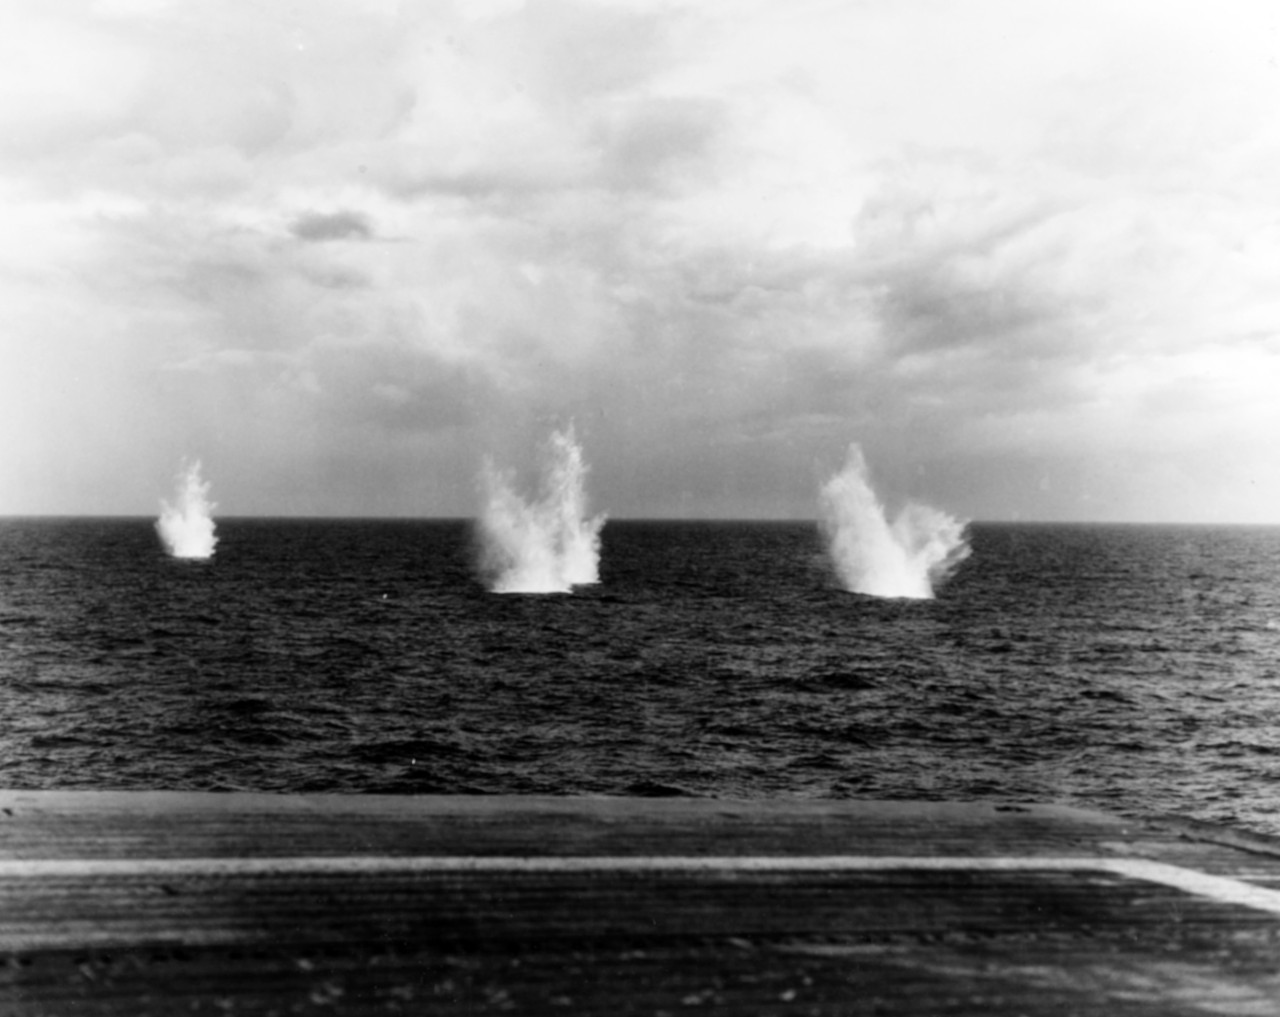 80-G-288886:  USS White Plains (CVE-66), October 25, 1944.  Battle of Leyte Gulf, Battle off Samar.  Splashes from Japanese shells near USS White Plains (CVE-66) during the Japanese fleet’s attack on Carrier Division 25  Official U.S. Navy Photograph, now in the collections of the National Archives.  